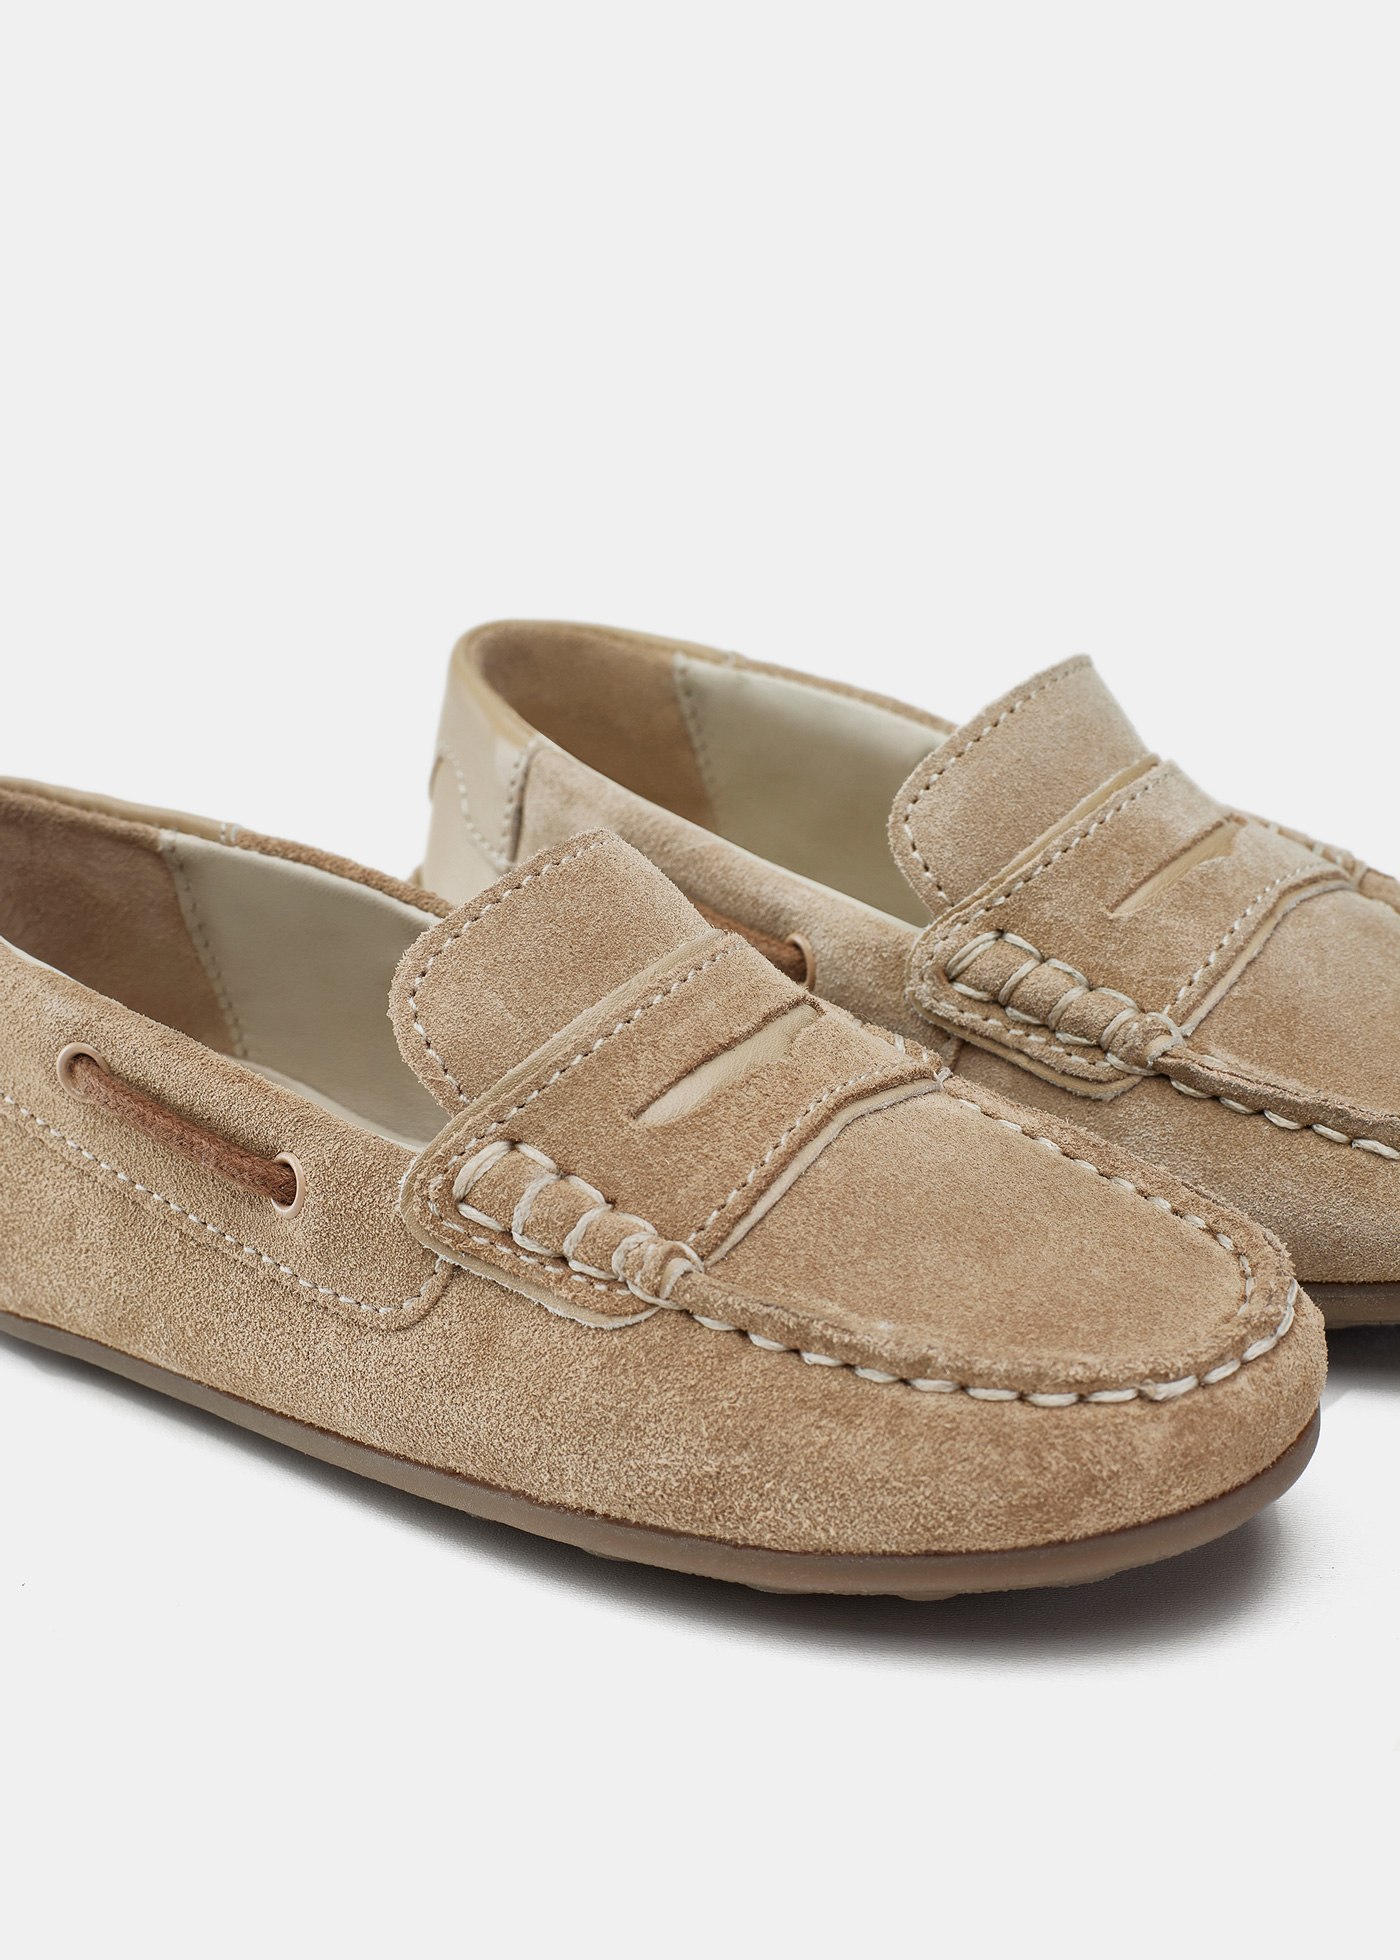 Boys leather moccasins